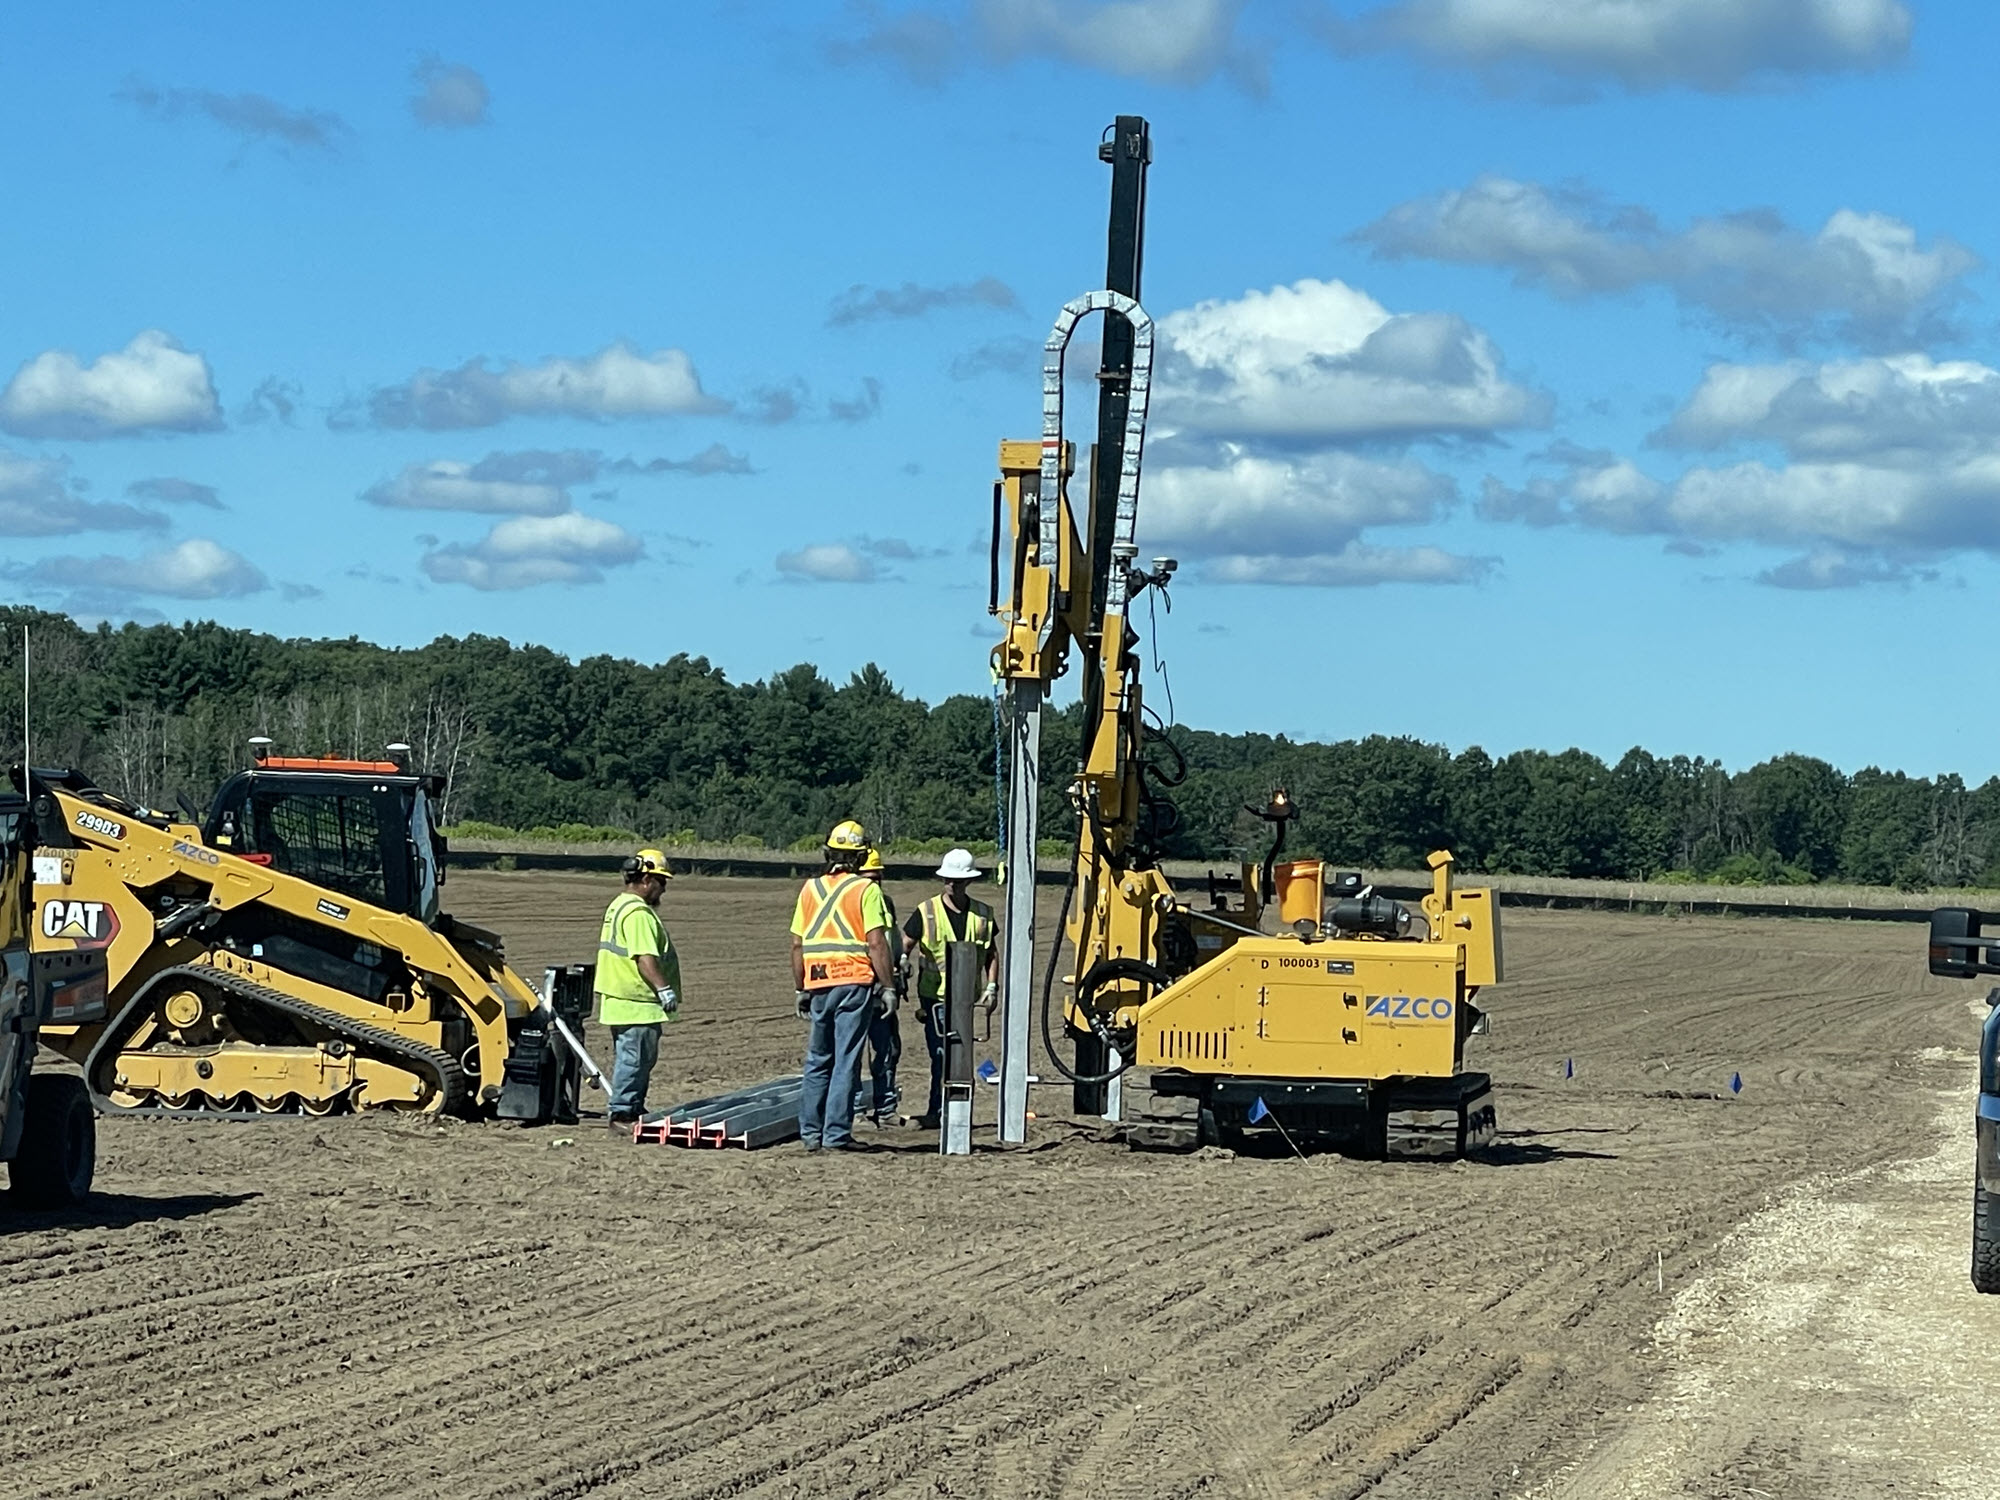 Land work begins at the Wautoma Solar Project location.